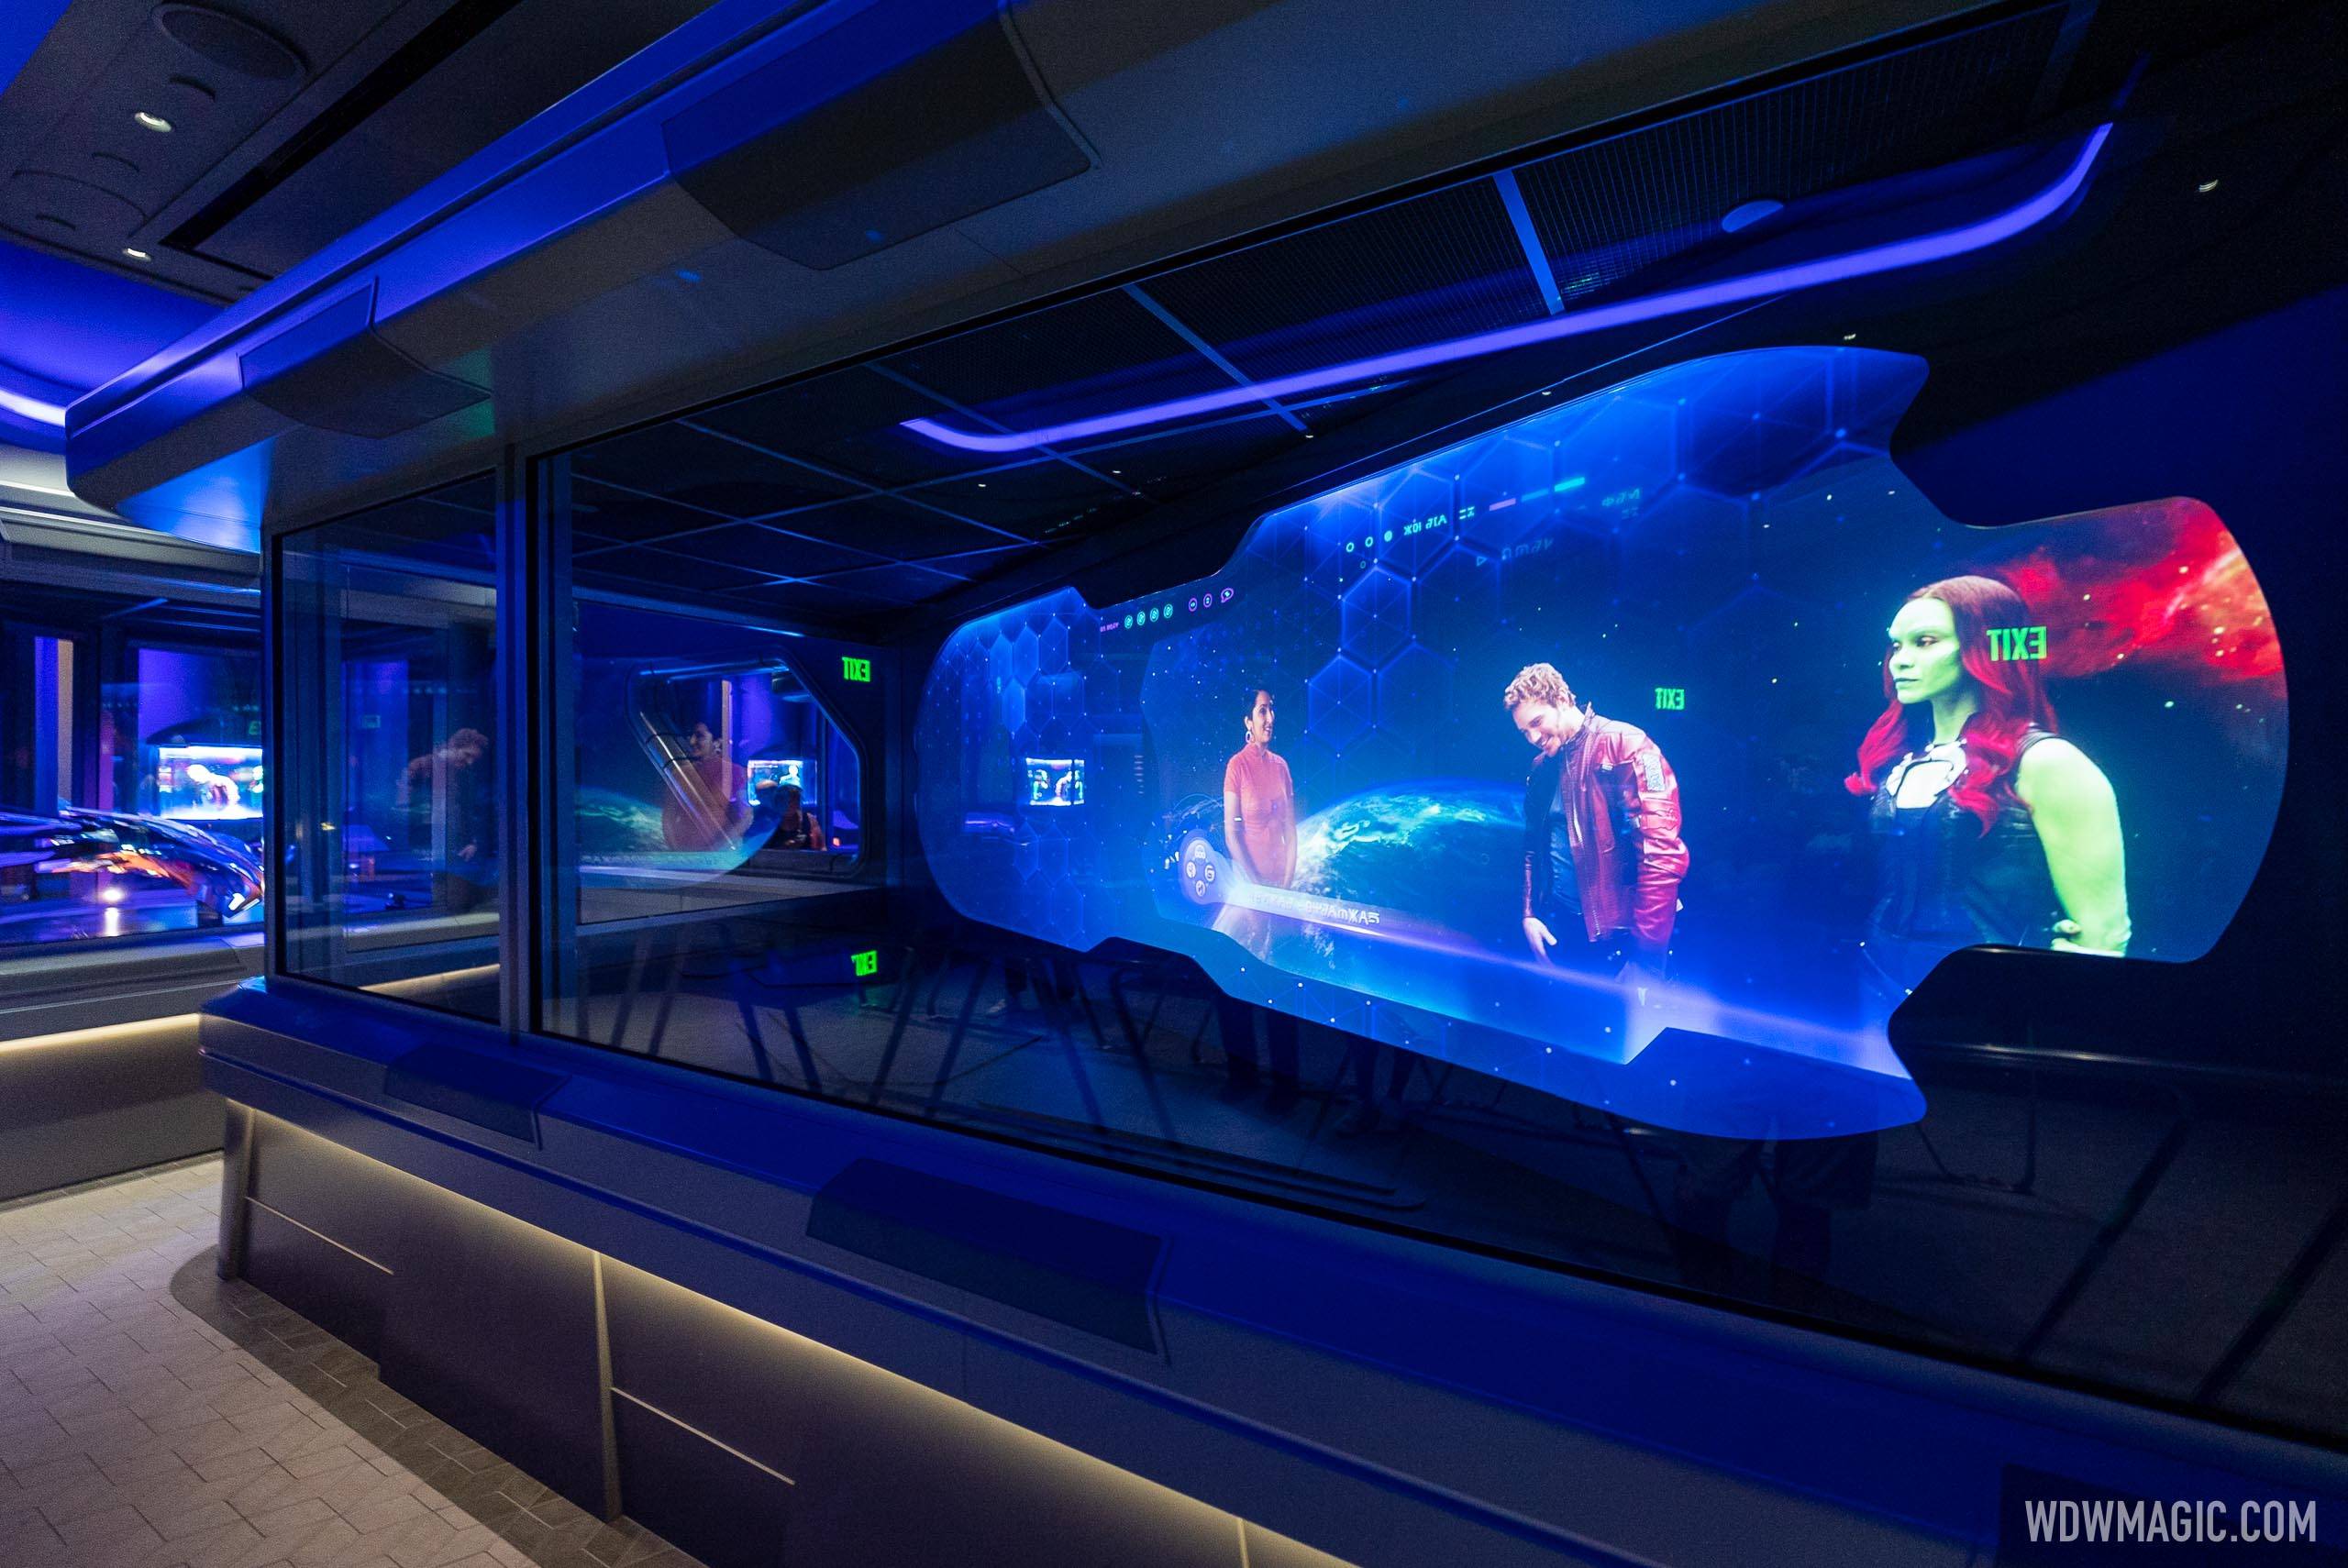 News segment in the queue area gallery that introduces the Guardians of the Galaxy characters